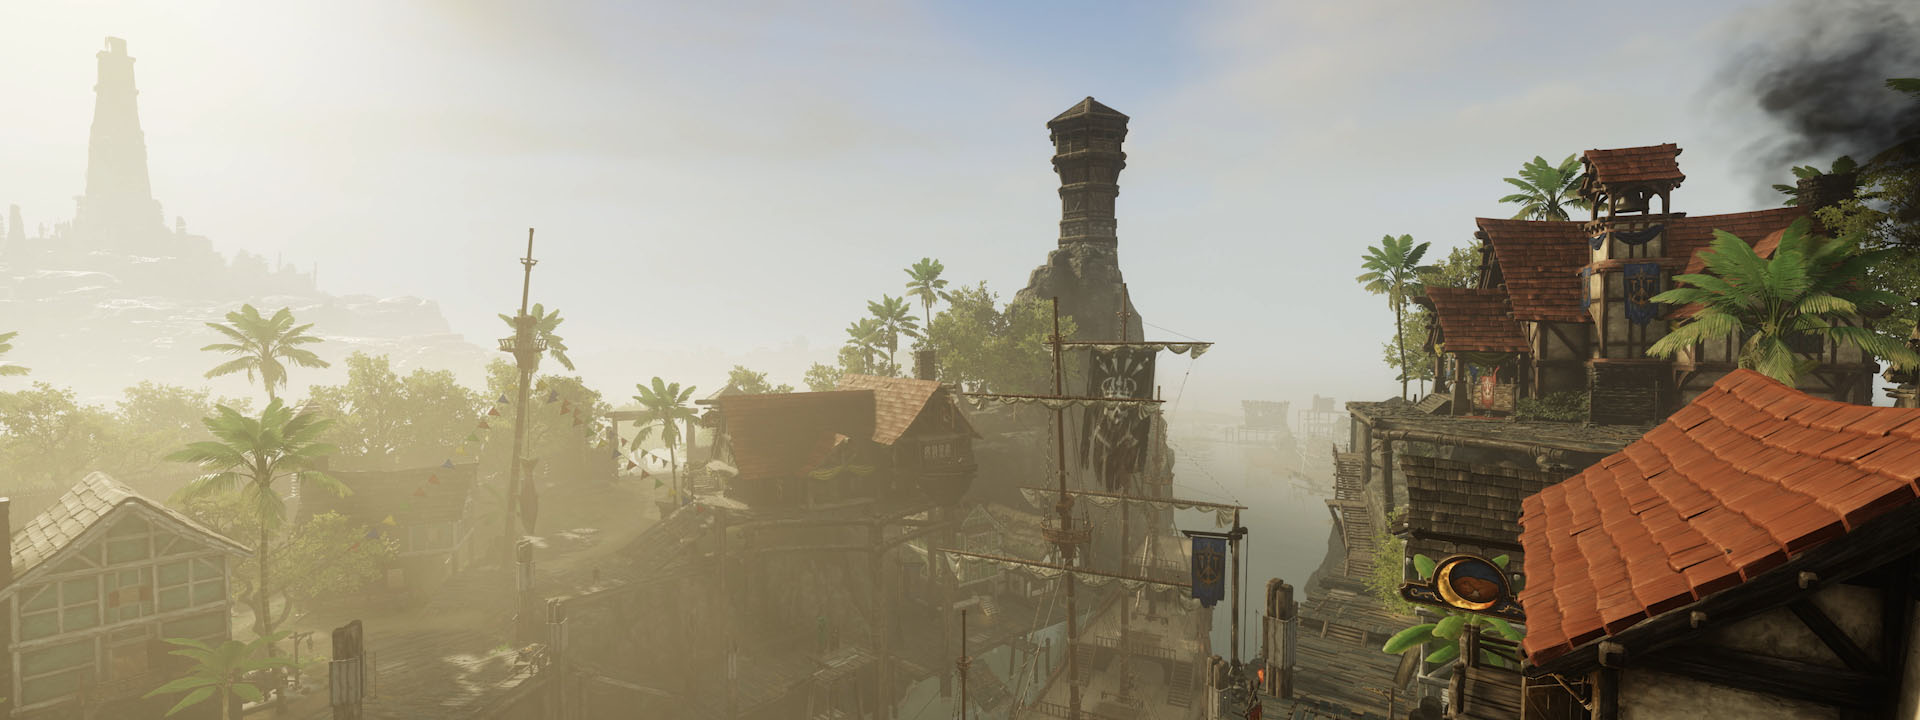 A screenshot showing a settlement's forge. At tier 5, it is an impressive structure with decorative embellishments and a large forge built into the final structure.